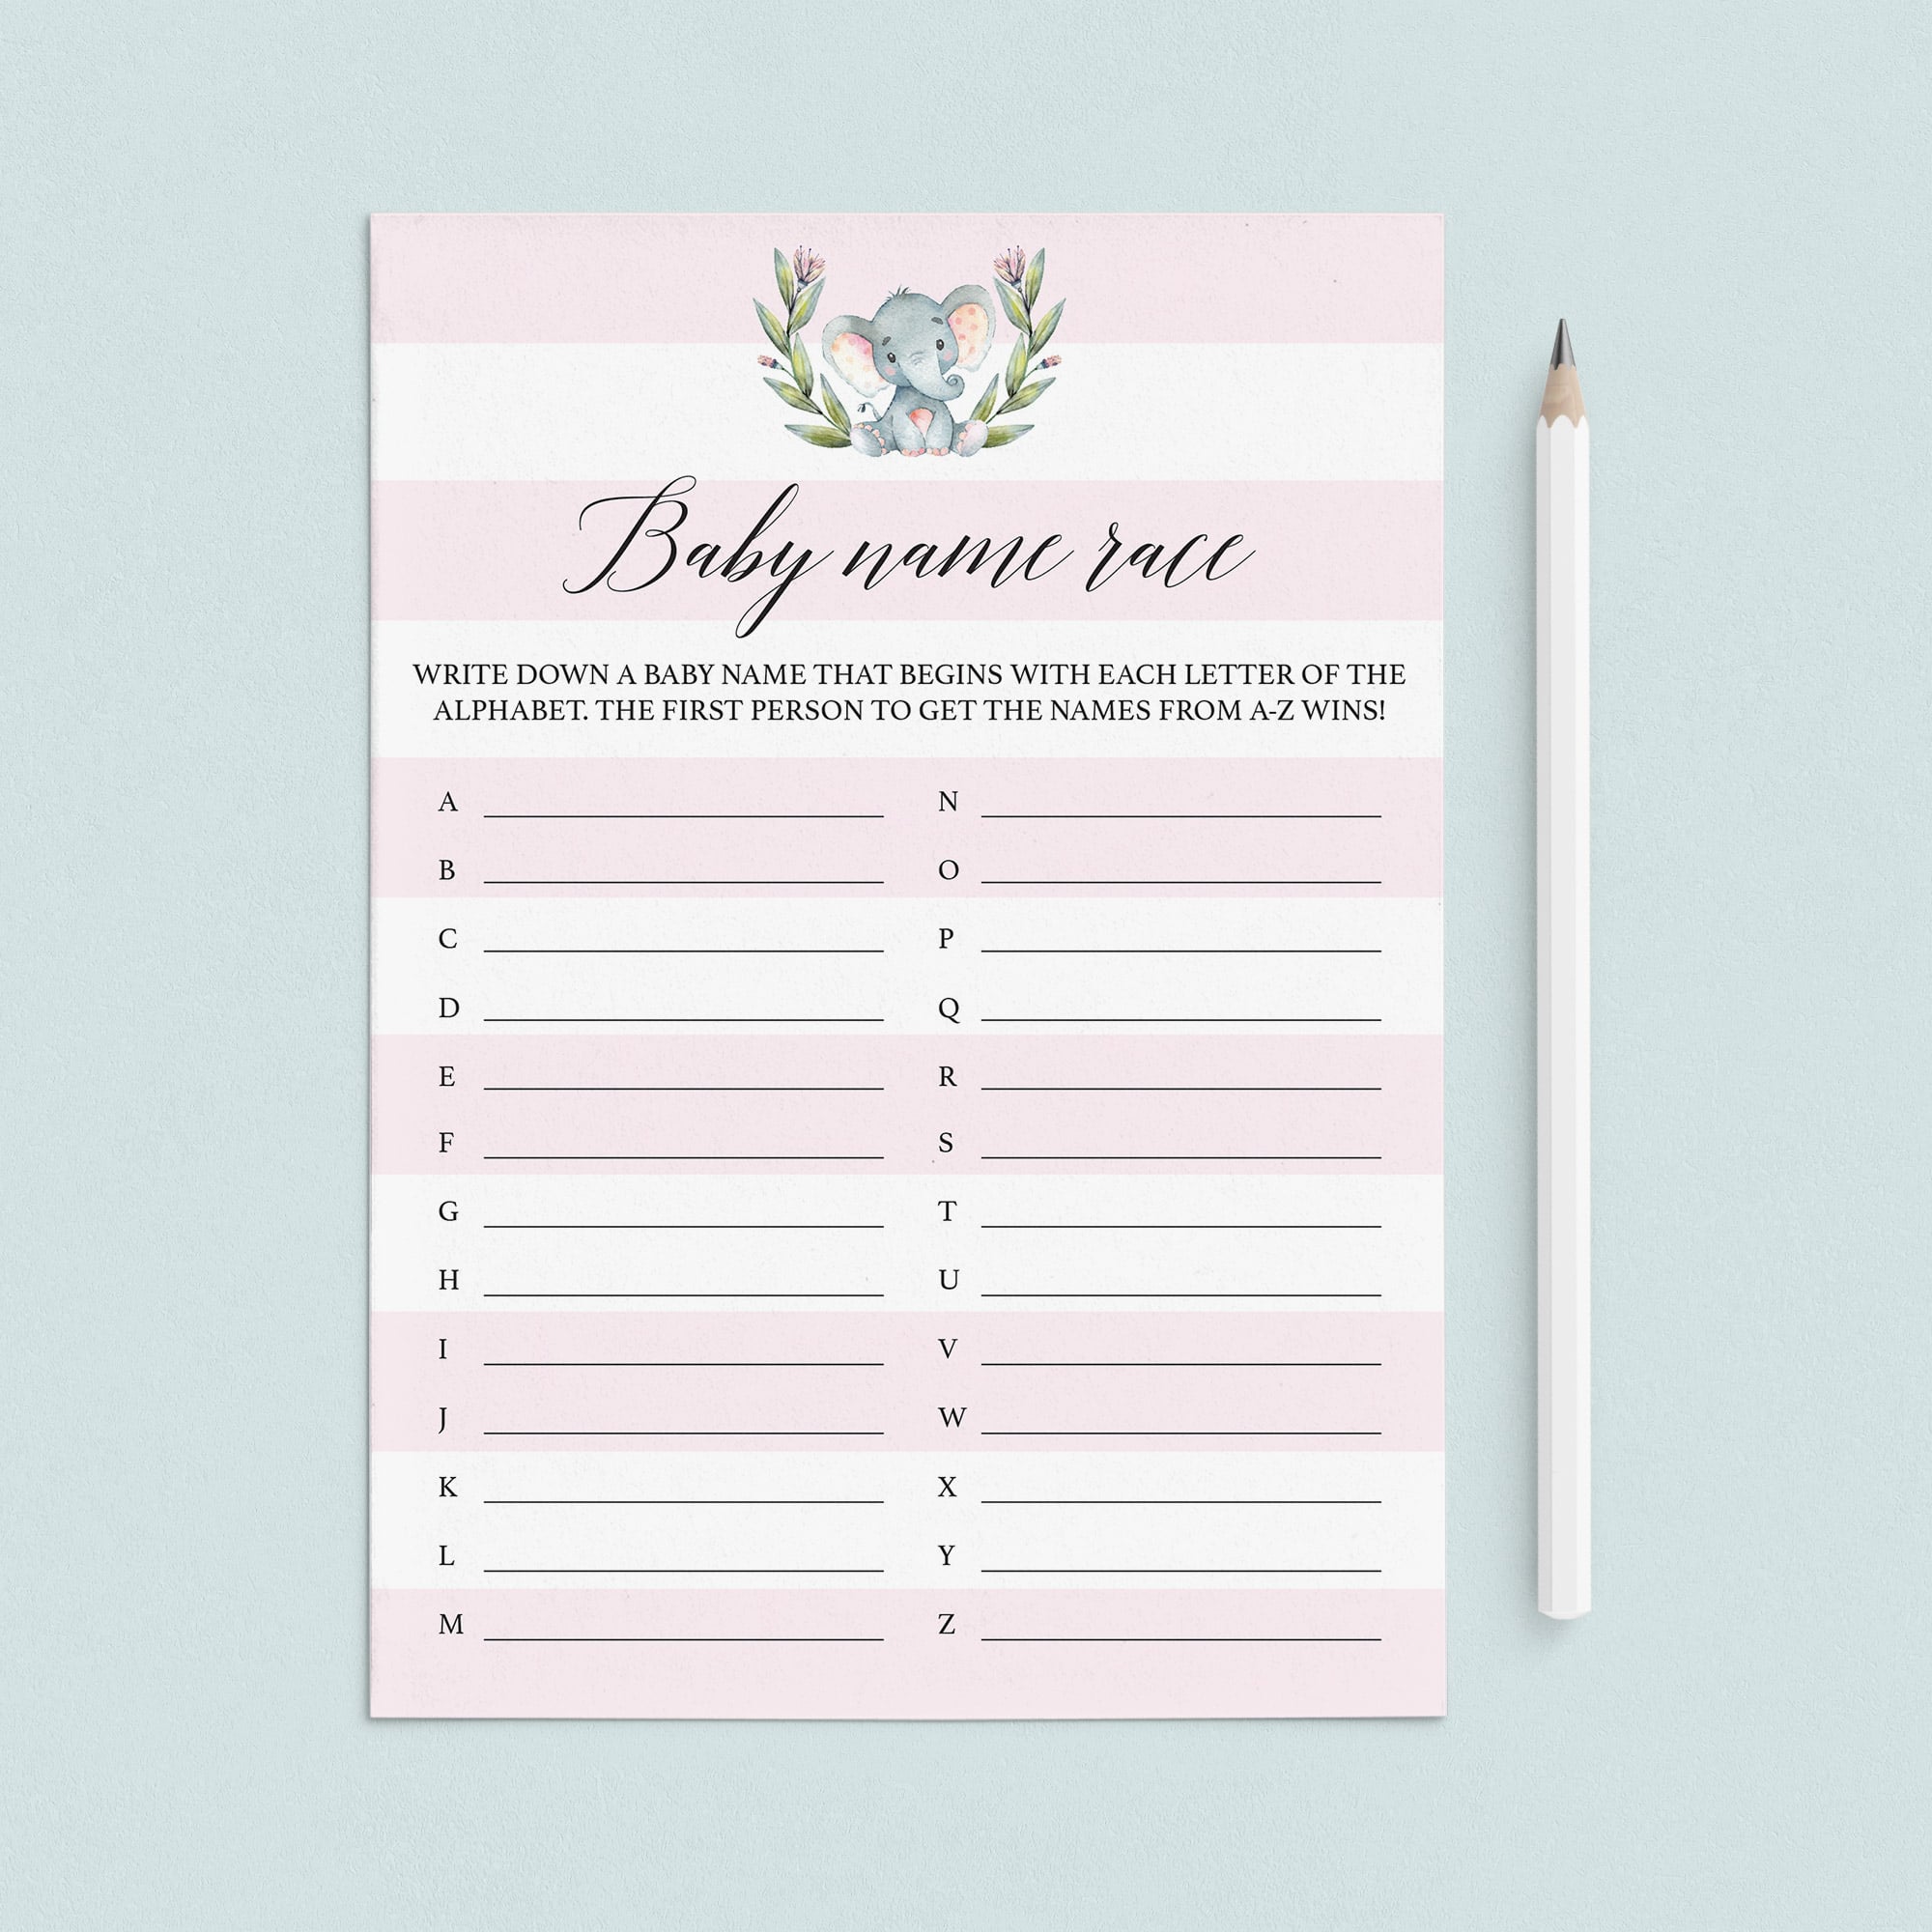 Baby names race game for girl baby shower printable by LittleSizzle